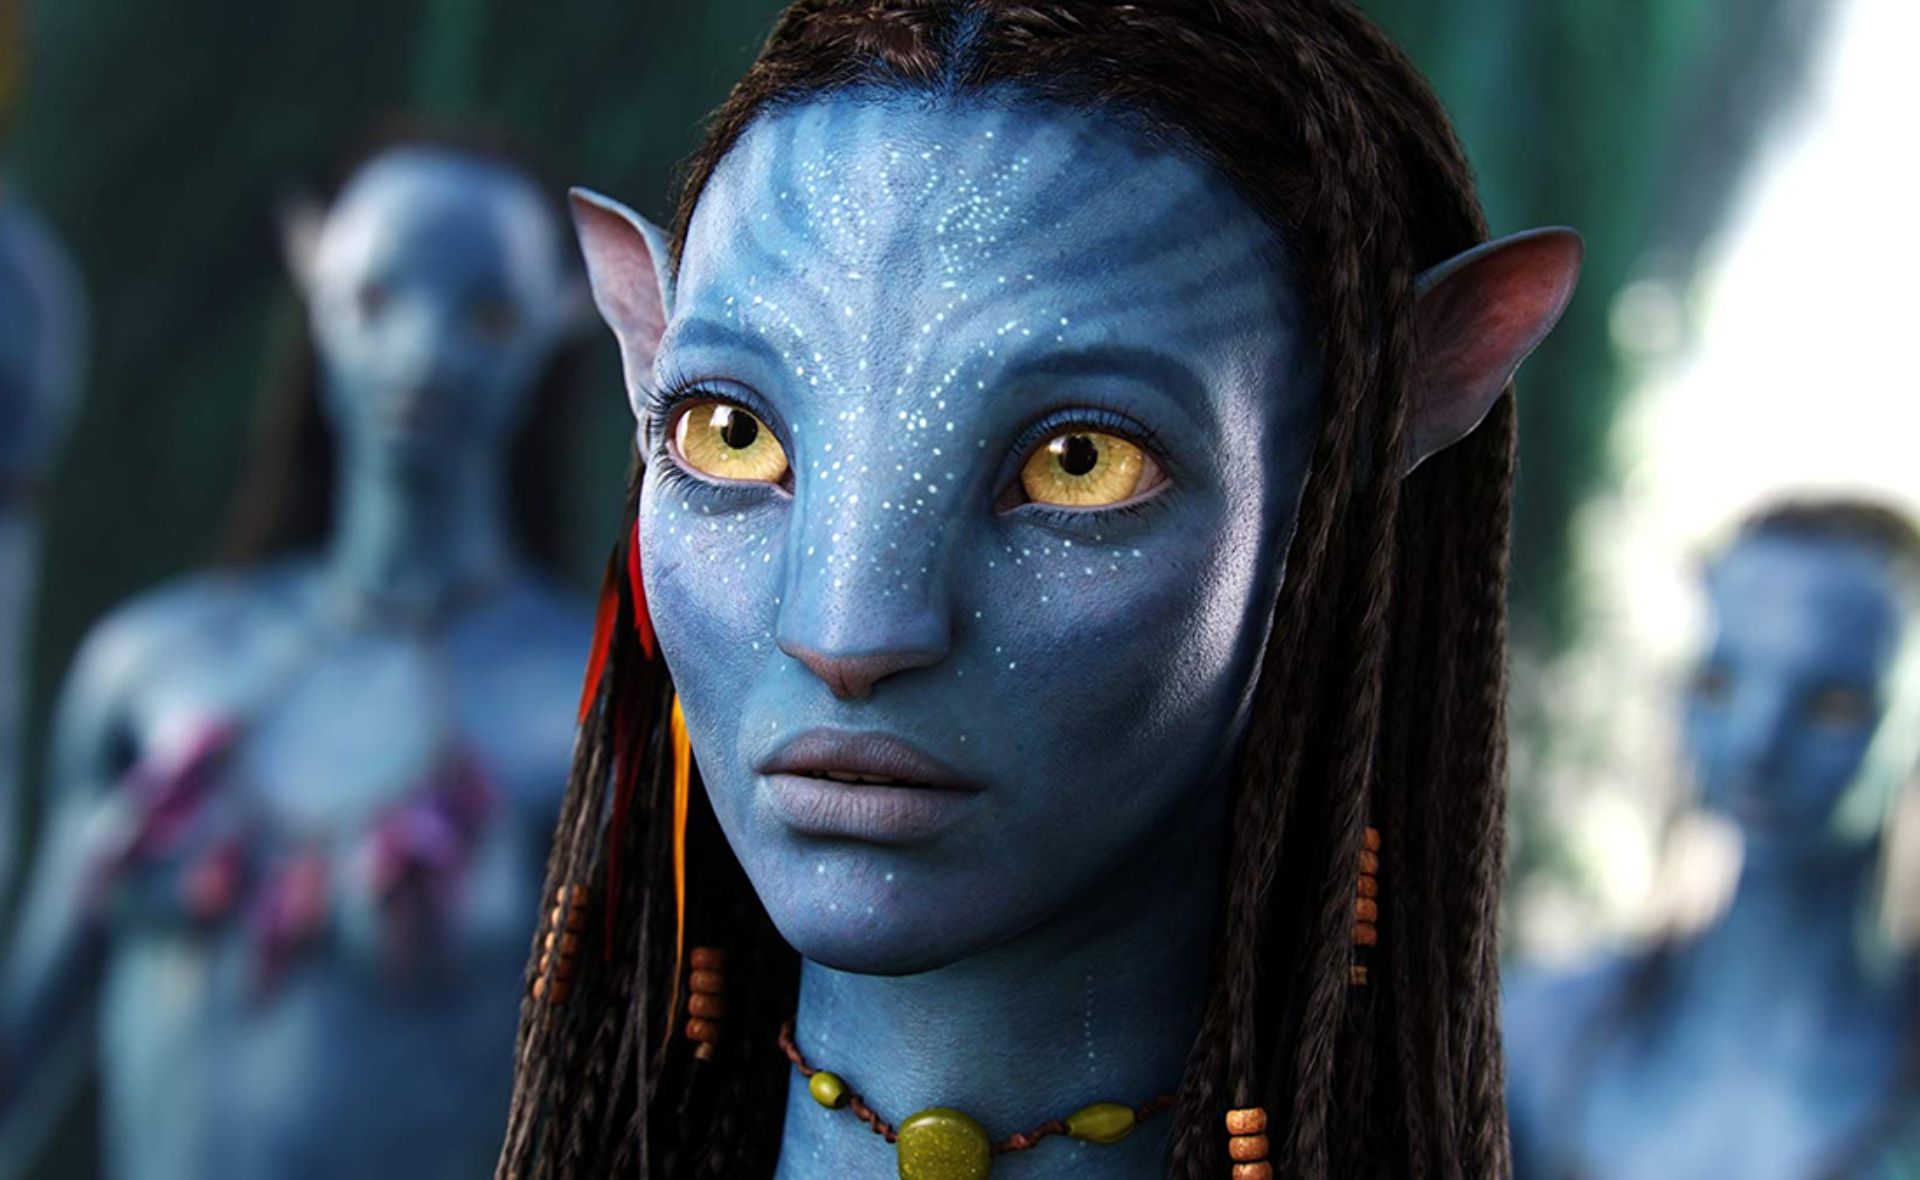 Here’s where you can watch Avatar: The Way of Water online now